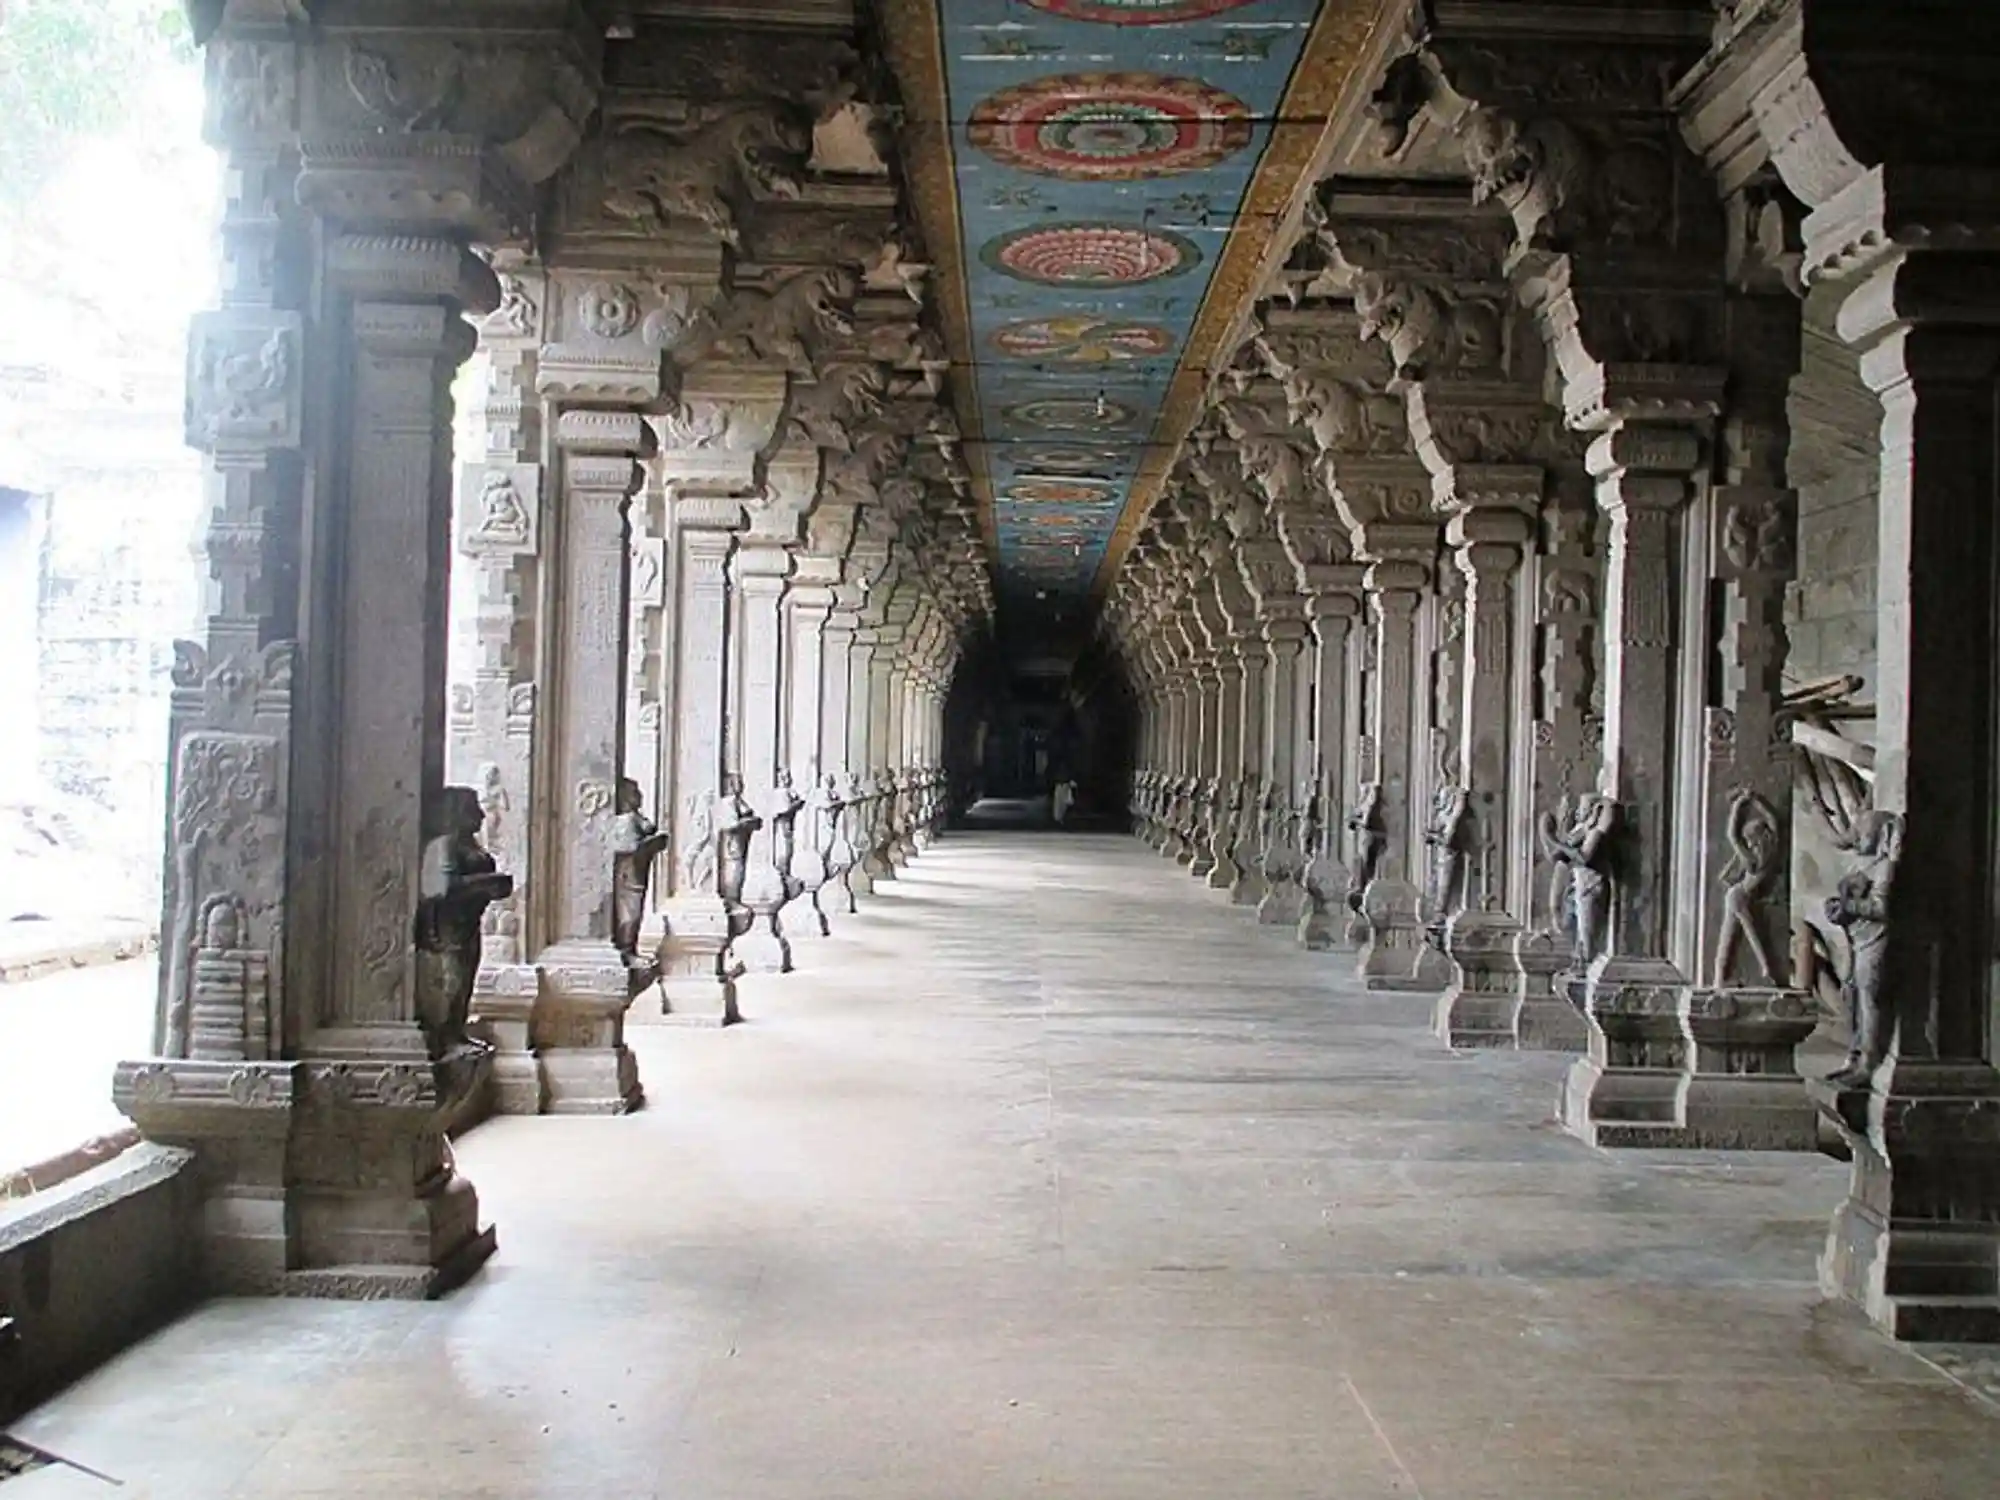 The pillars at the Temple I Source: Wikimedia Commons